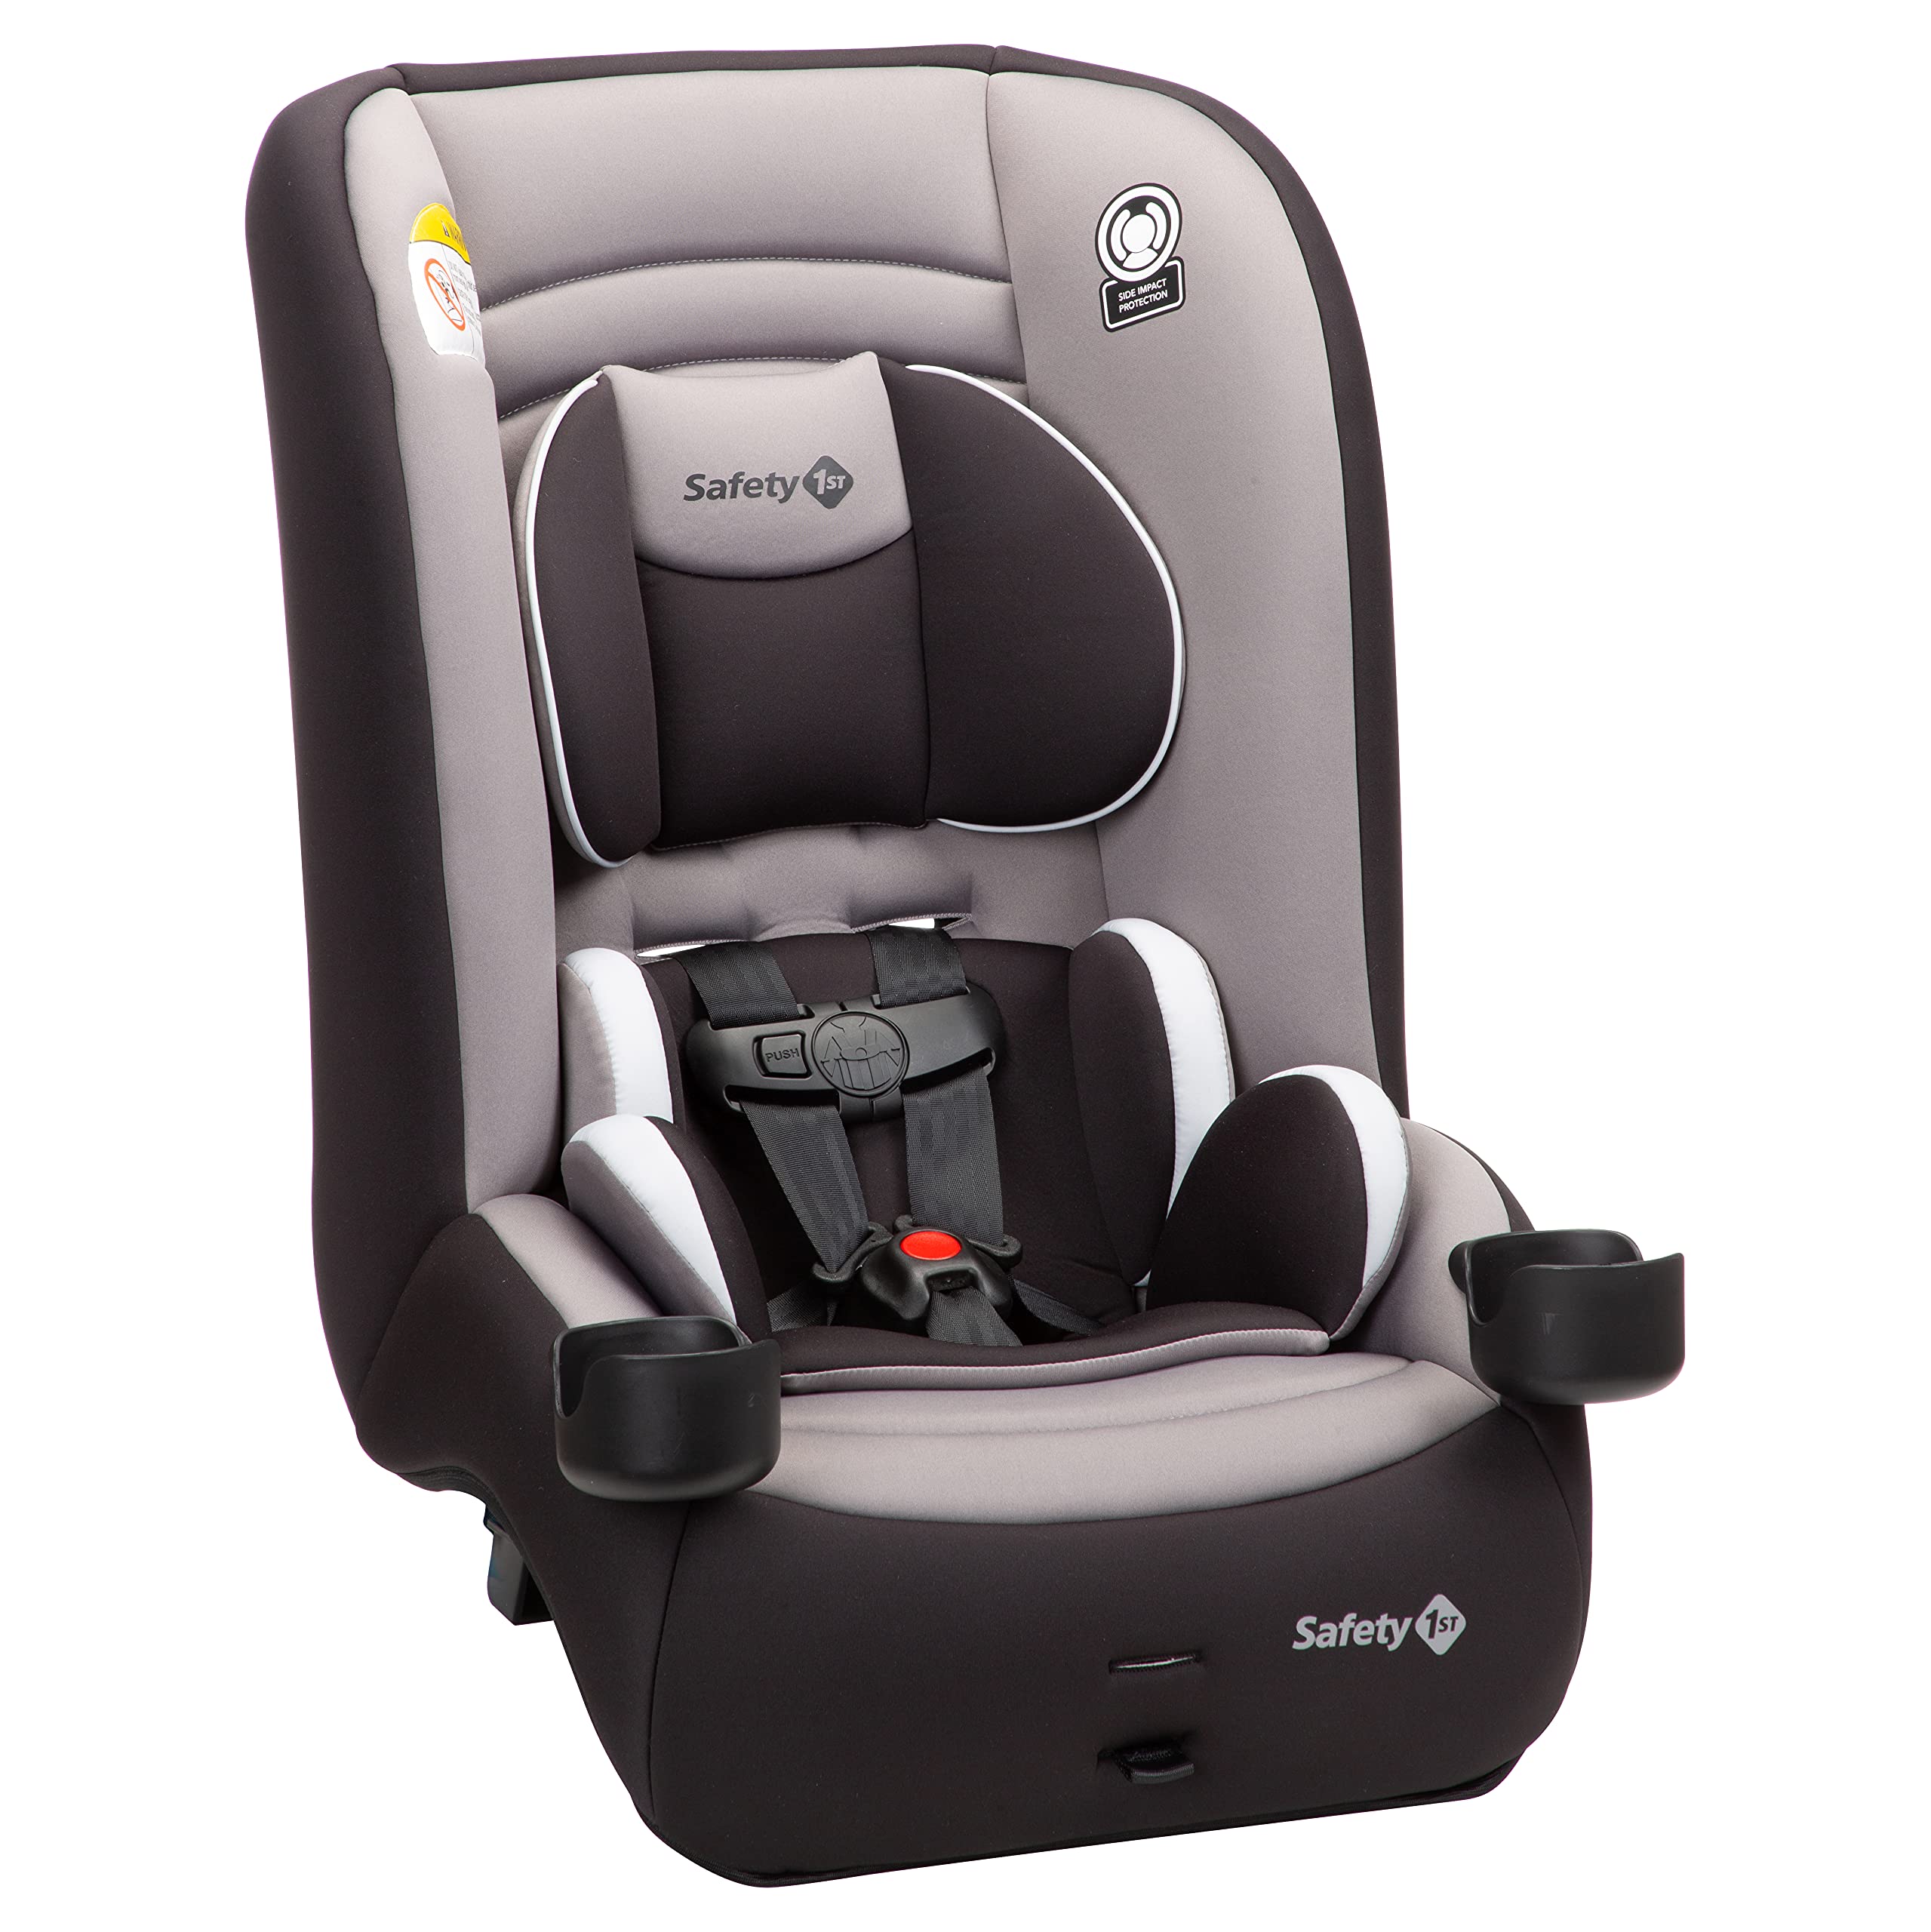 Safety 1st Jive 2-in-1 Convertible Car Seat,Rear-Facing 5-40 pounds and Forward-Facing 22-65 pounds, Black Fox